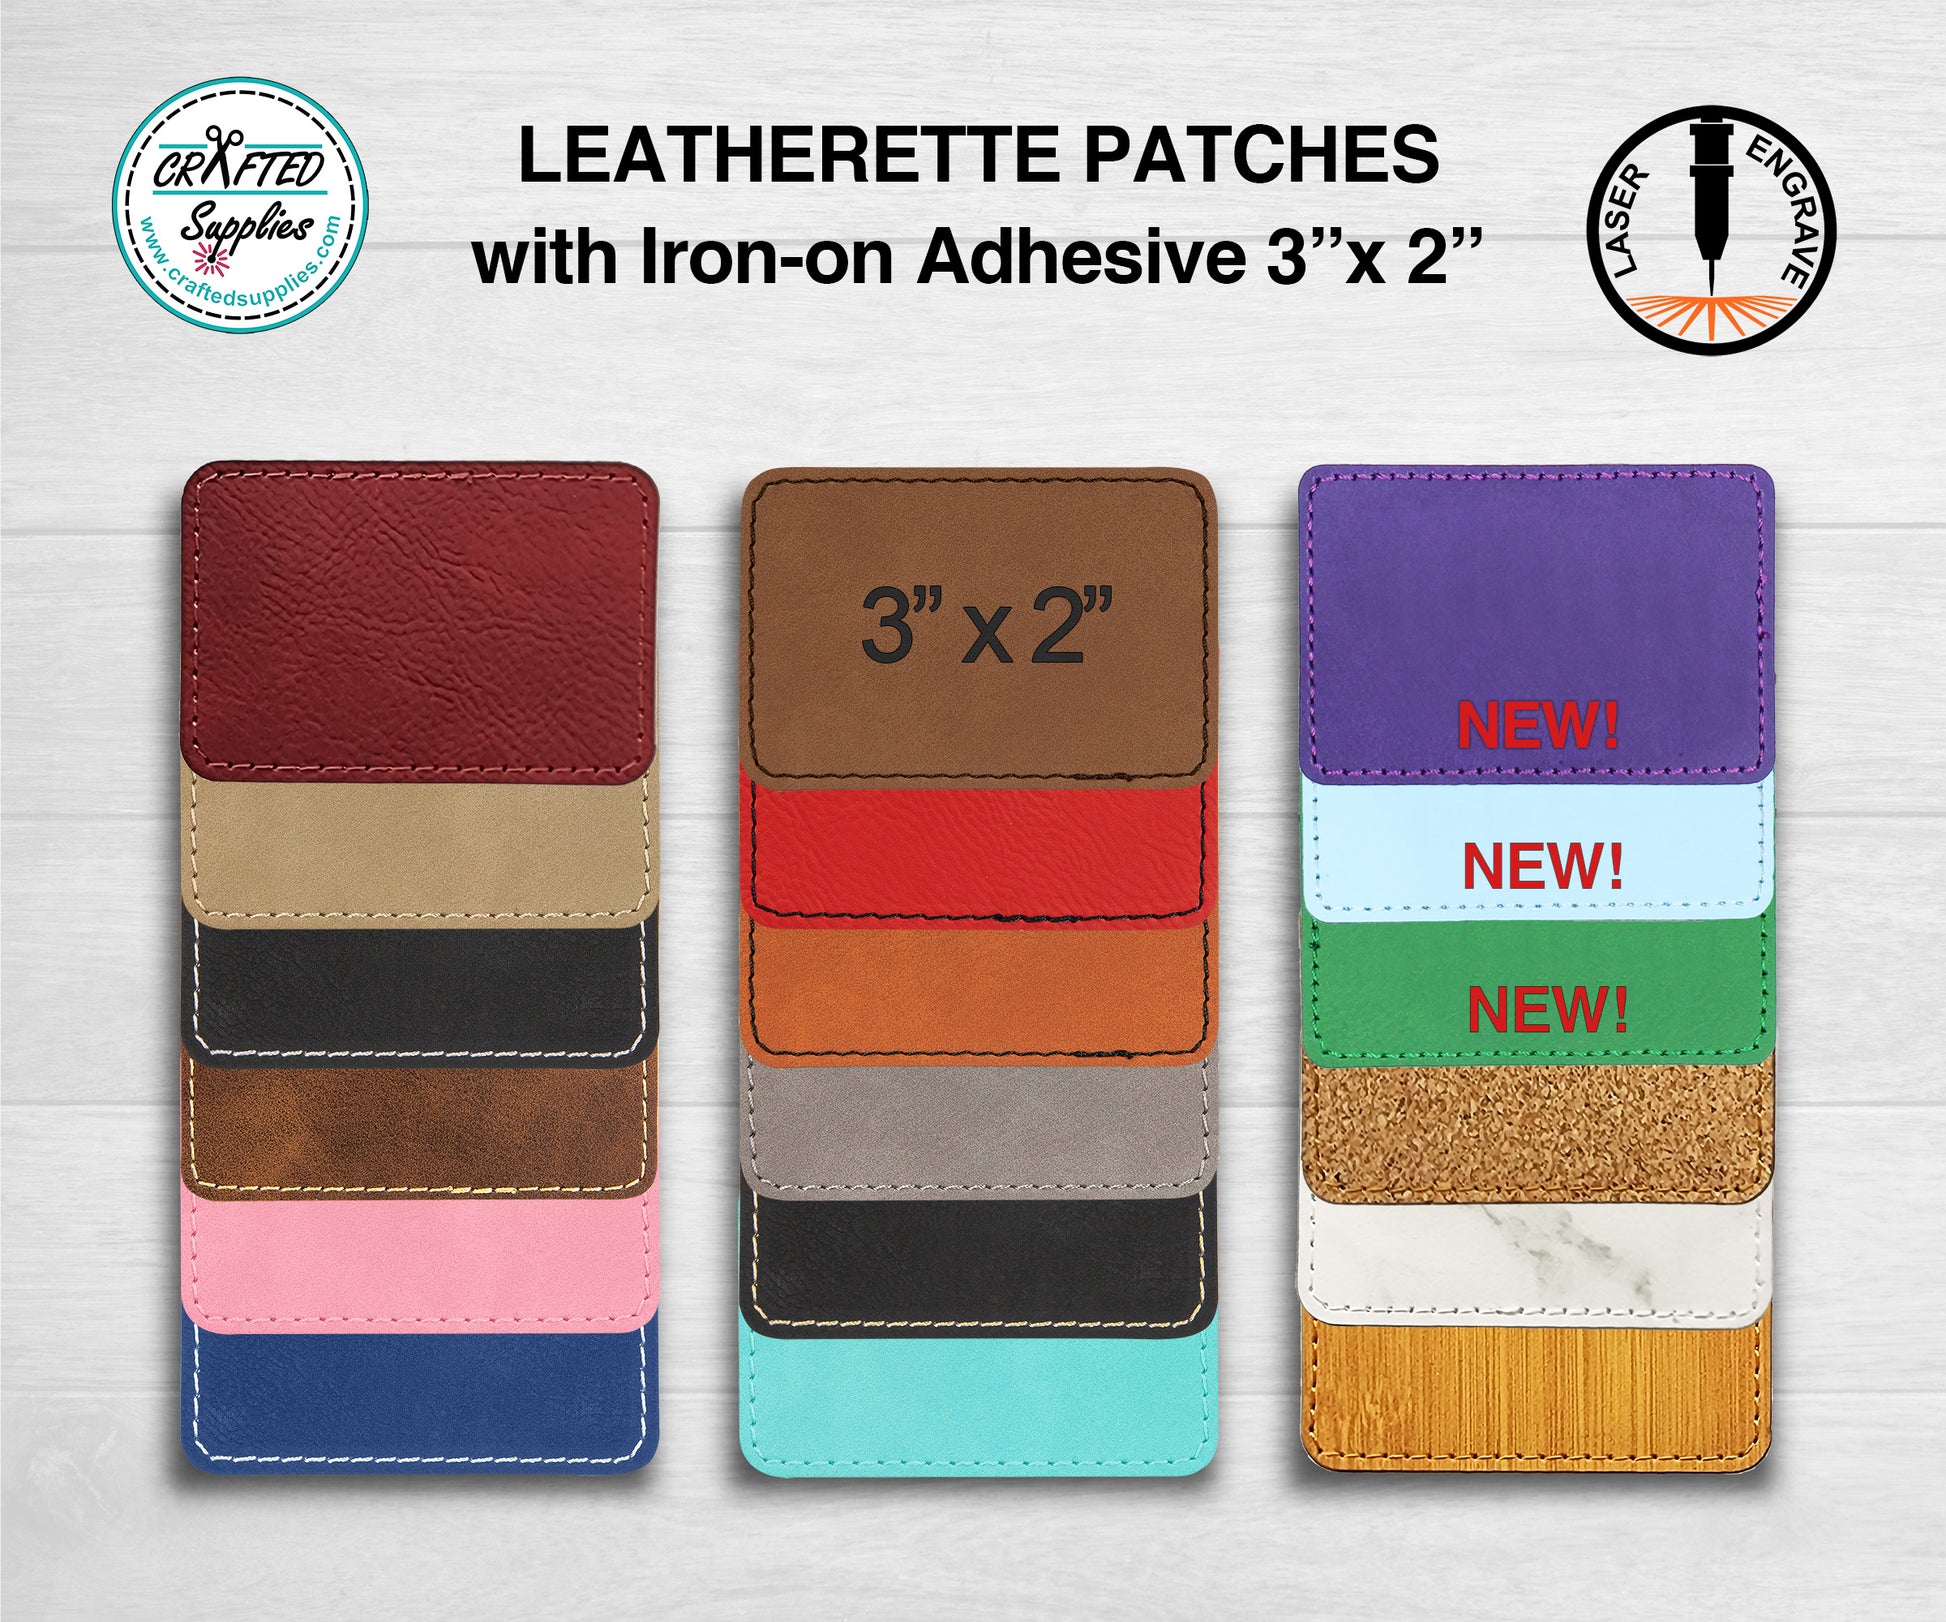 Leather Hat Patch With Heat Adhesive – CraftedSupplies